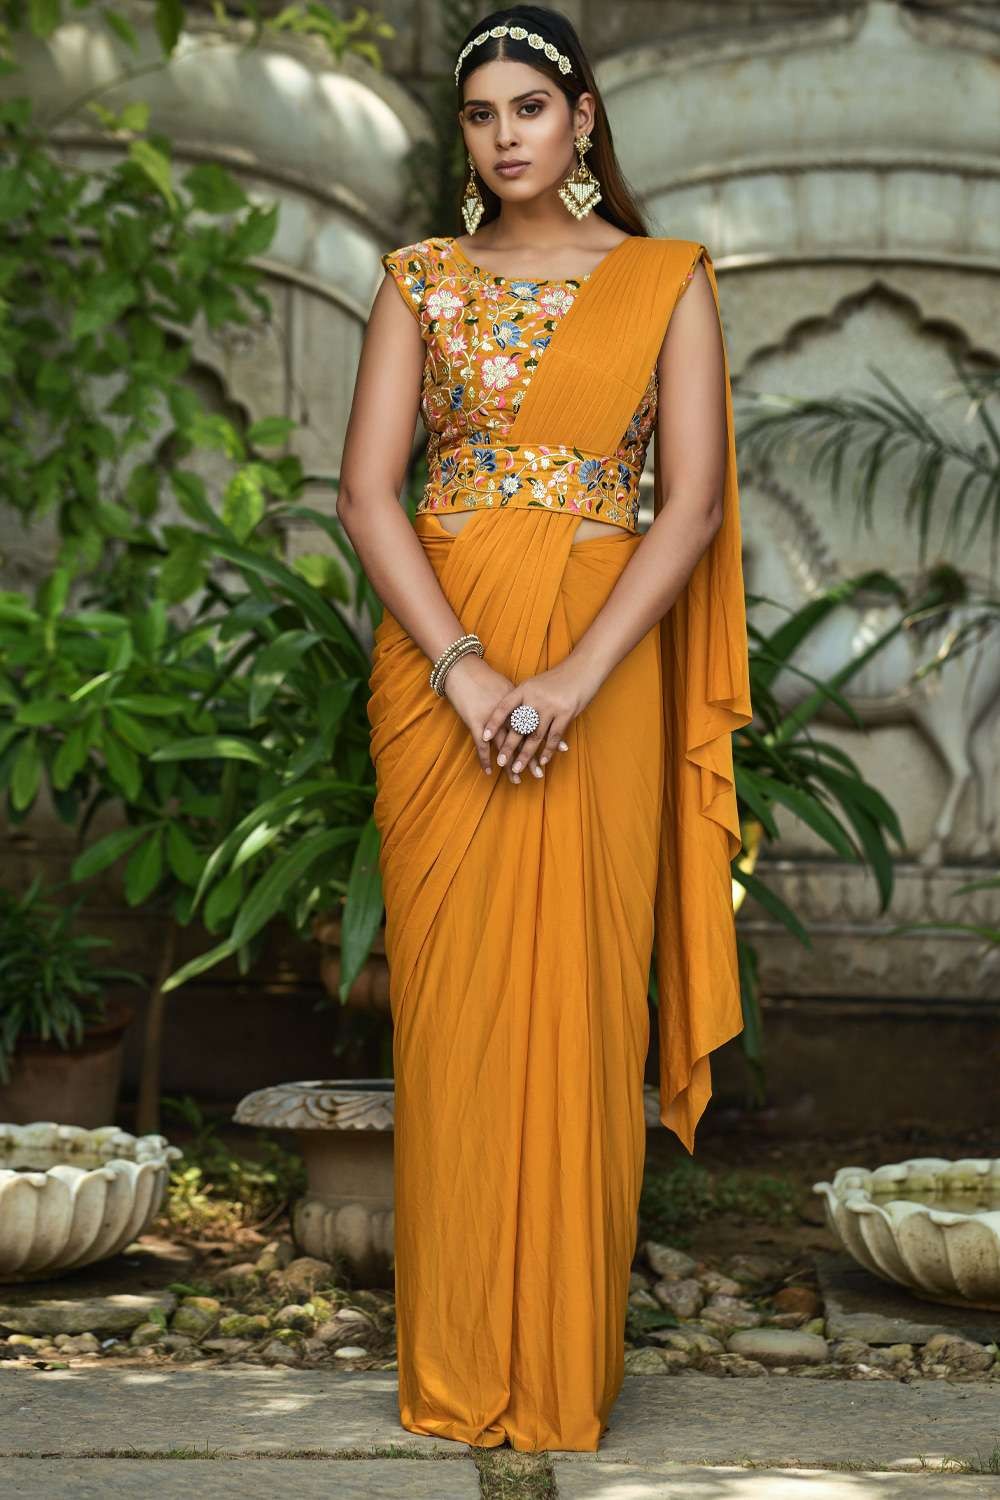 https://media.shopkund.com/media/catalog/product/cache/3/image/9df78eab33525d08d6e5fb8d27136e95/a/c/acu7682-3-lycra-thread-embroidered-mustard-party-wear-saree-with-blouse-sr23308_2_.jpg